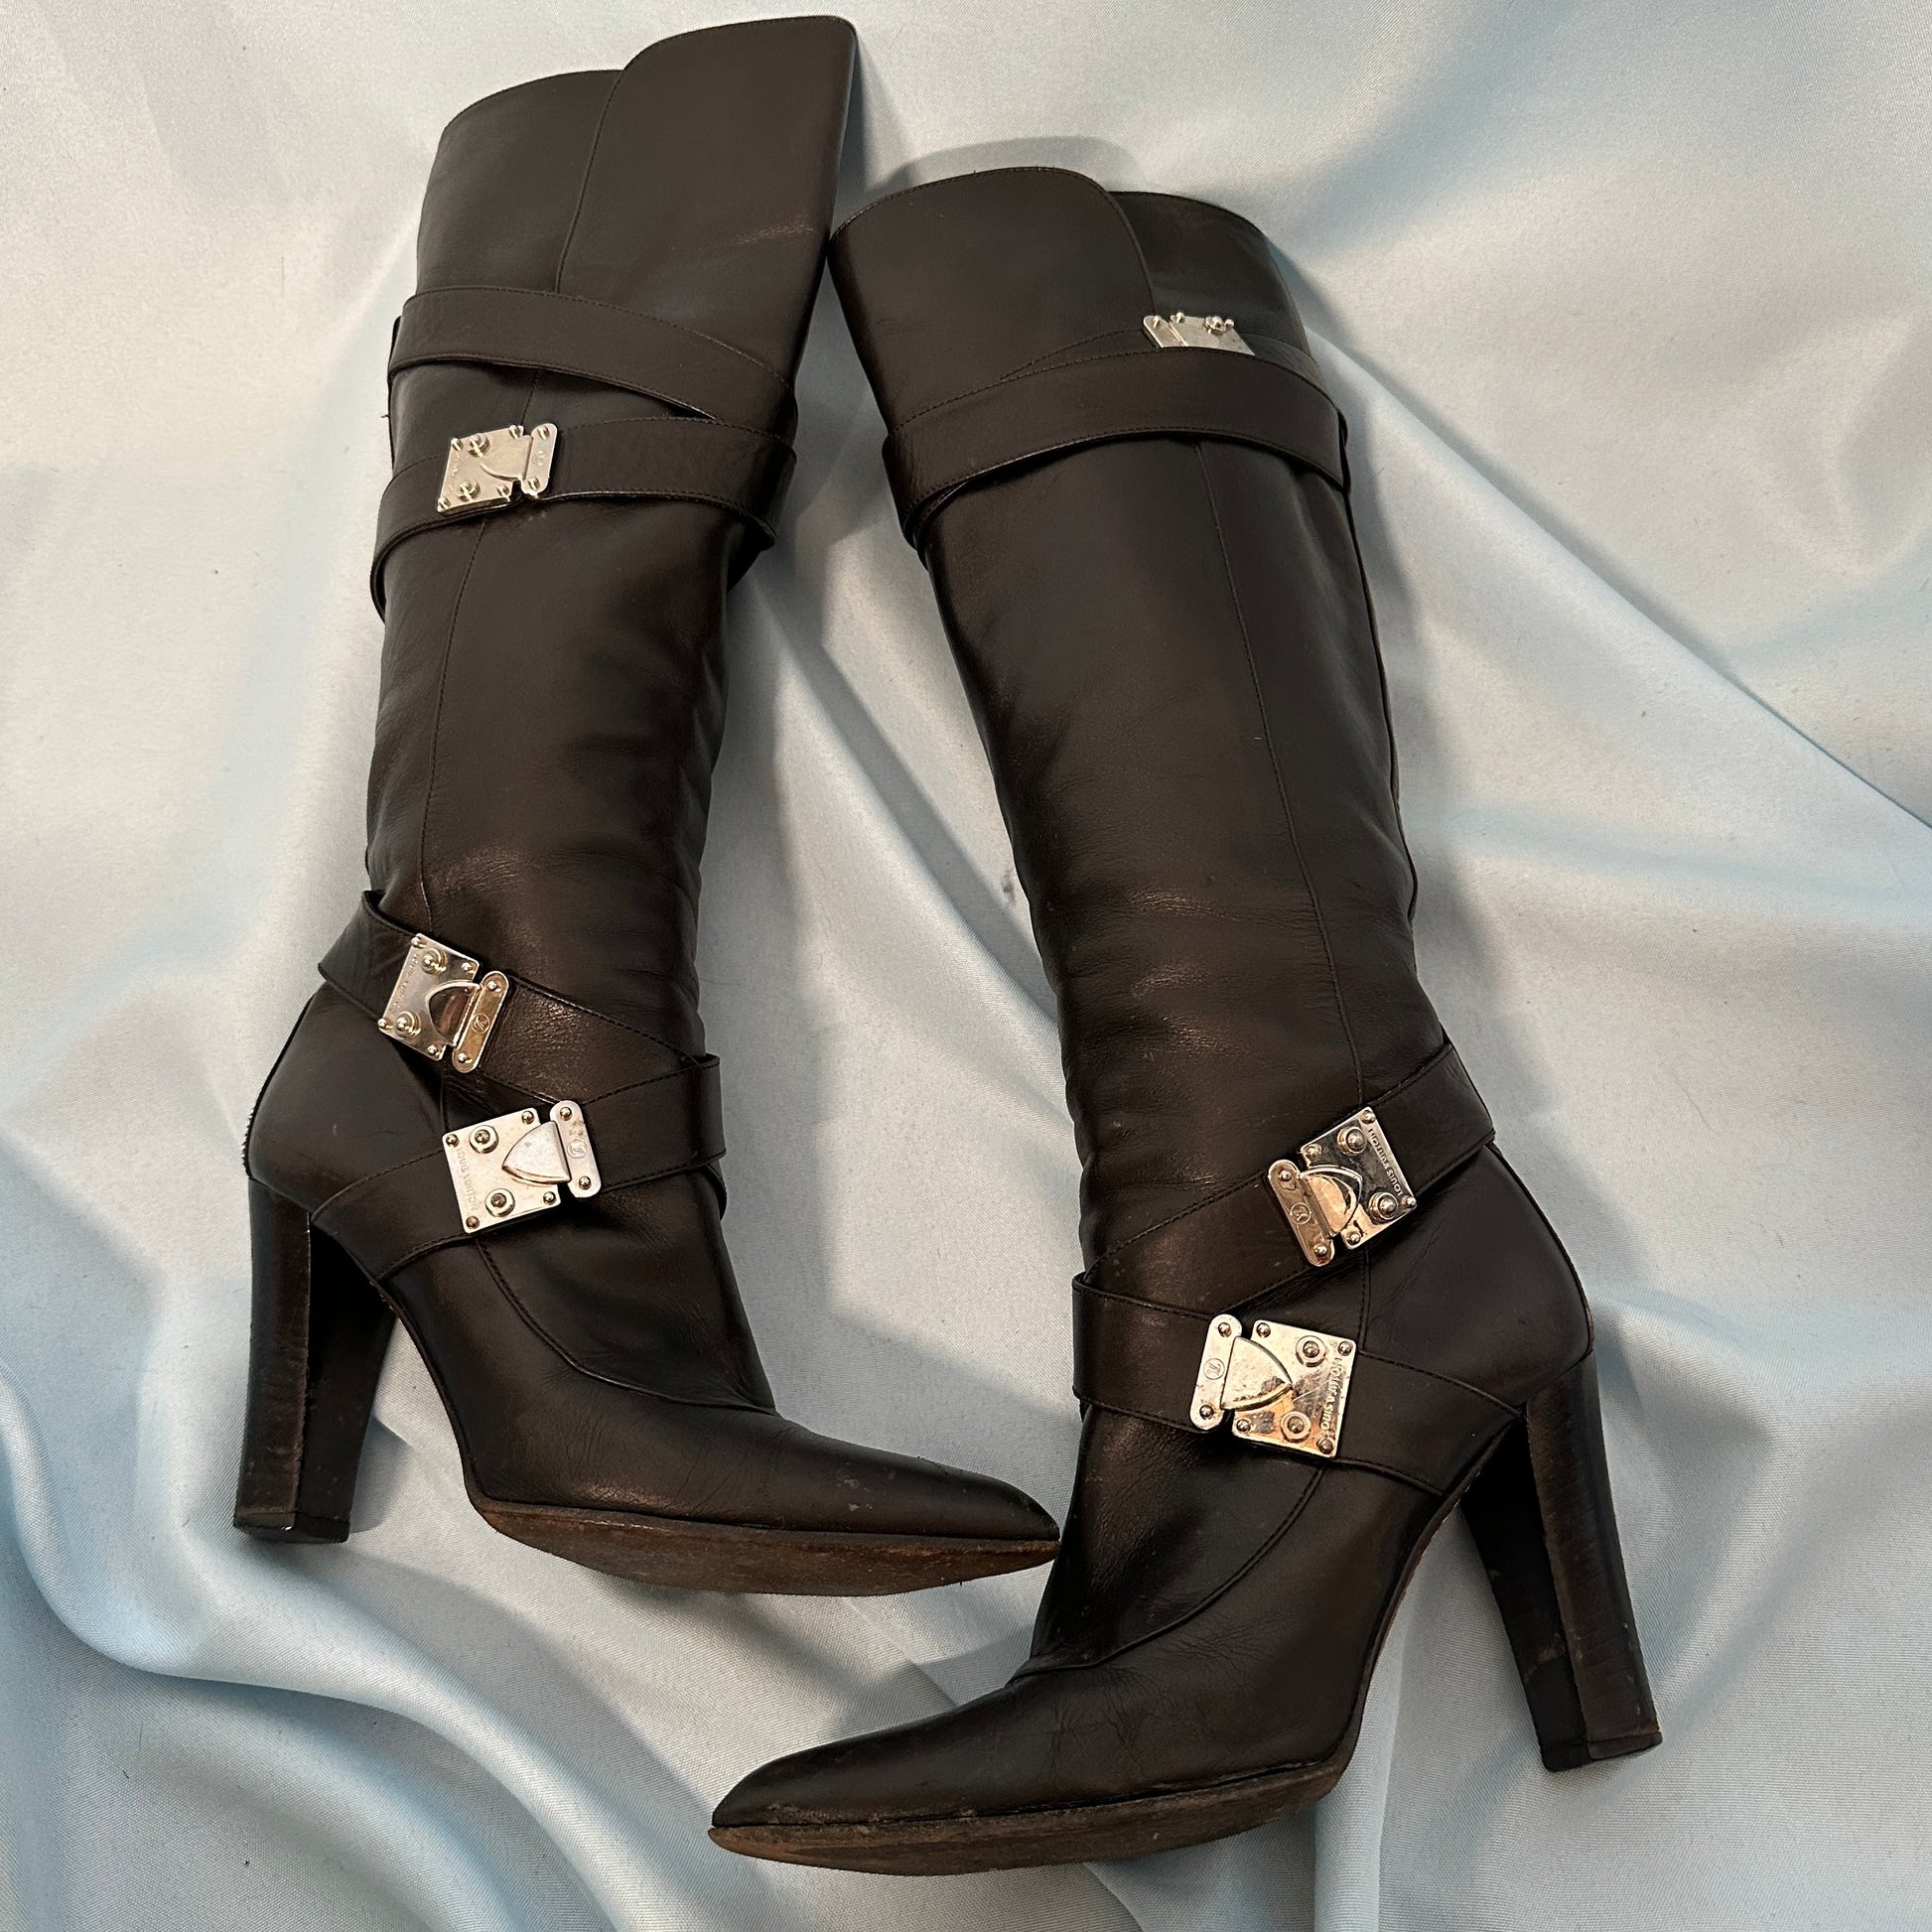 Louis Vuitton Black Leather Buckle Detail Heeled Boots – Studded